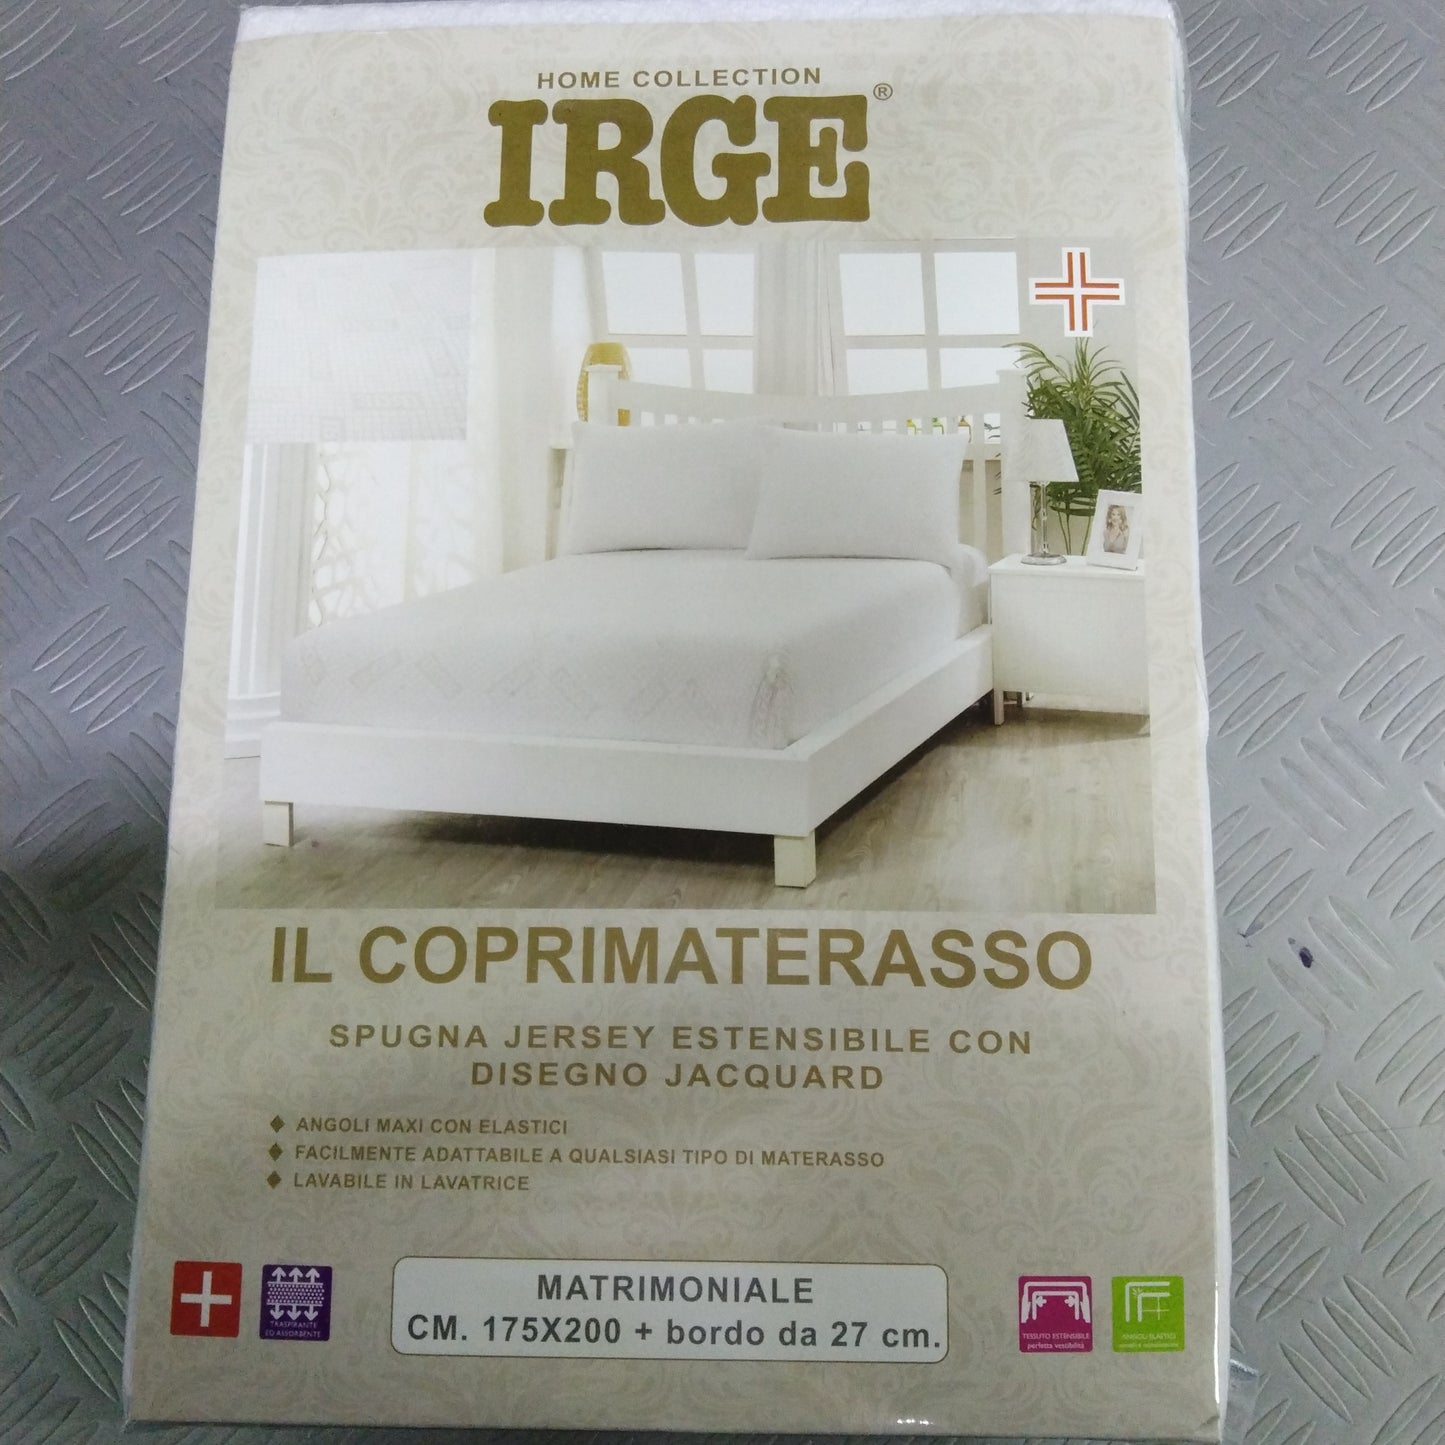 Double mattress cover with sponge